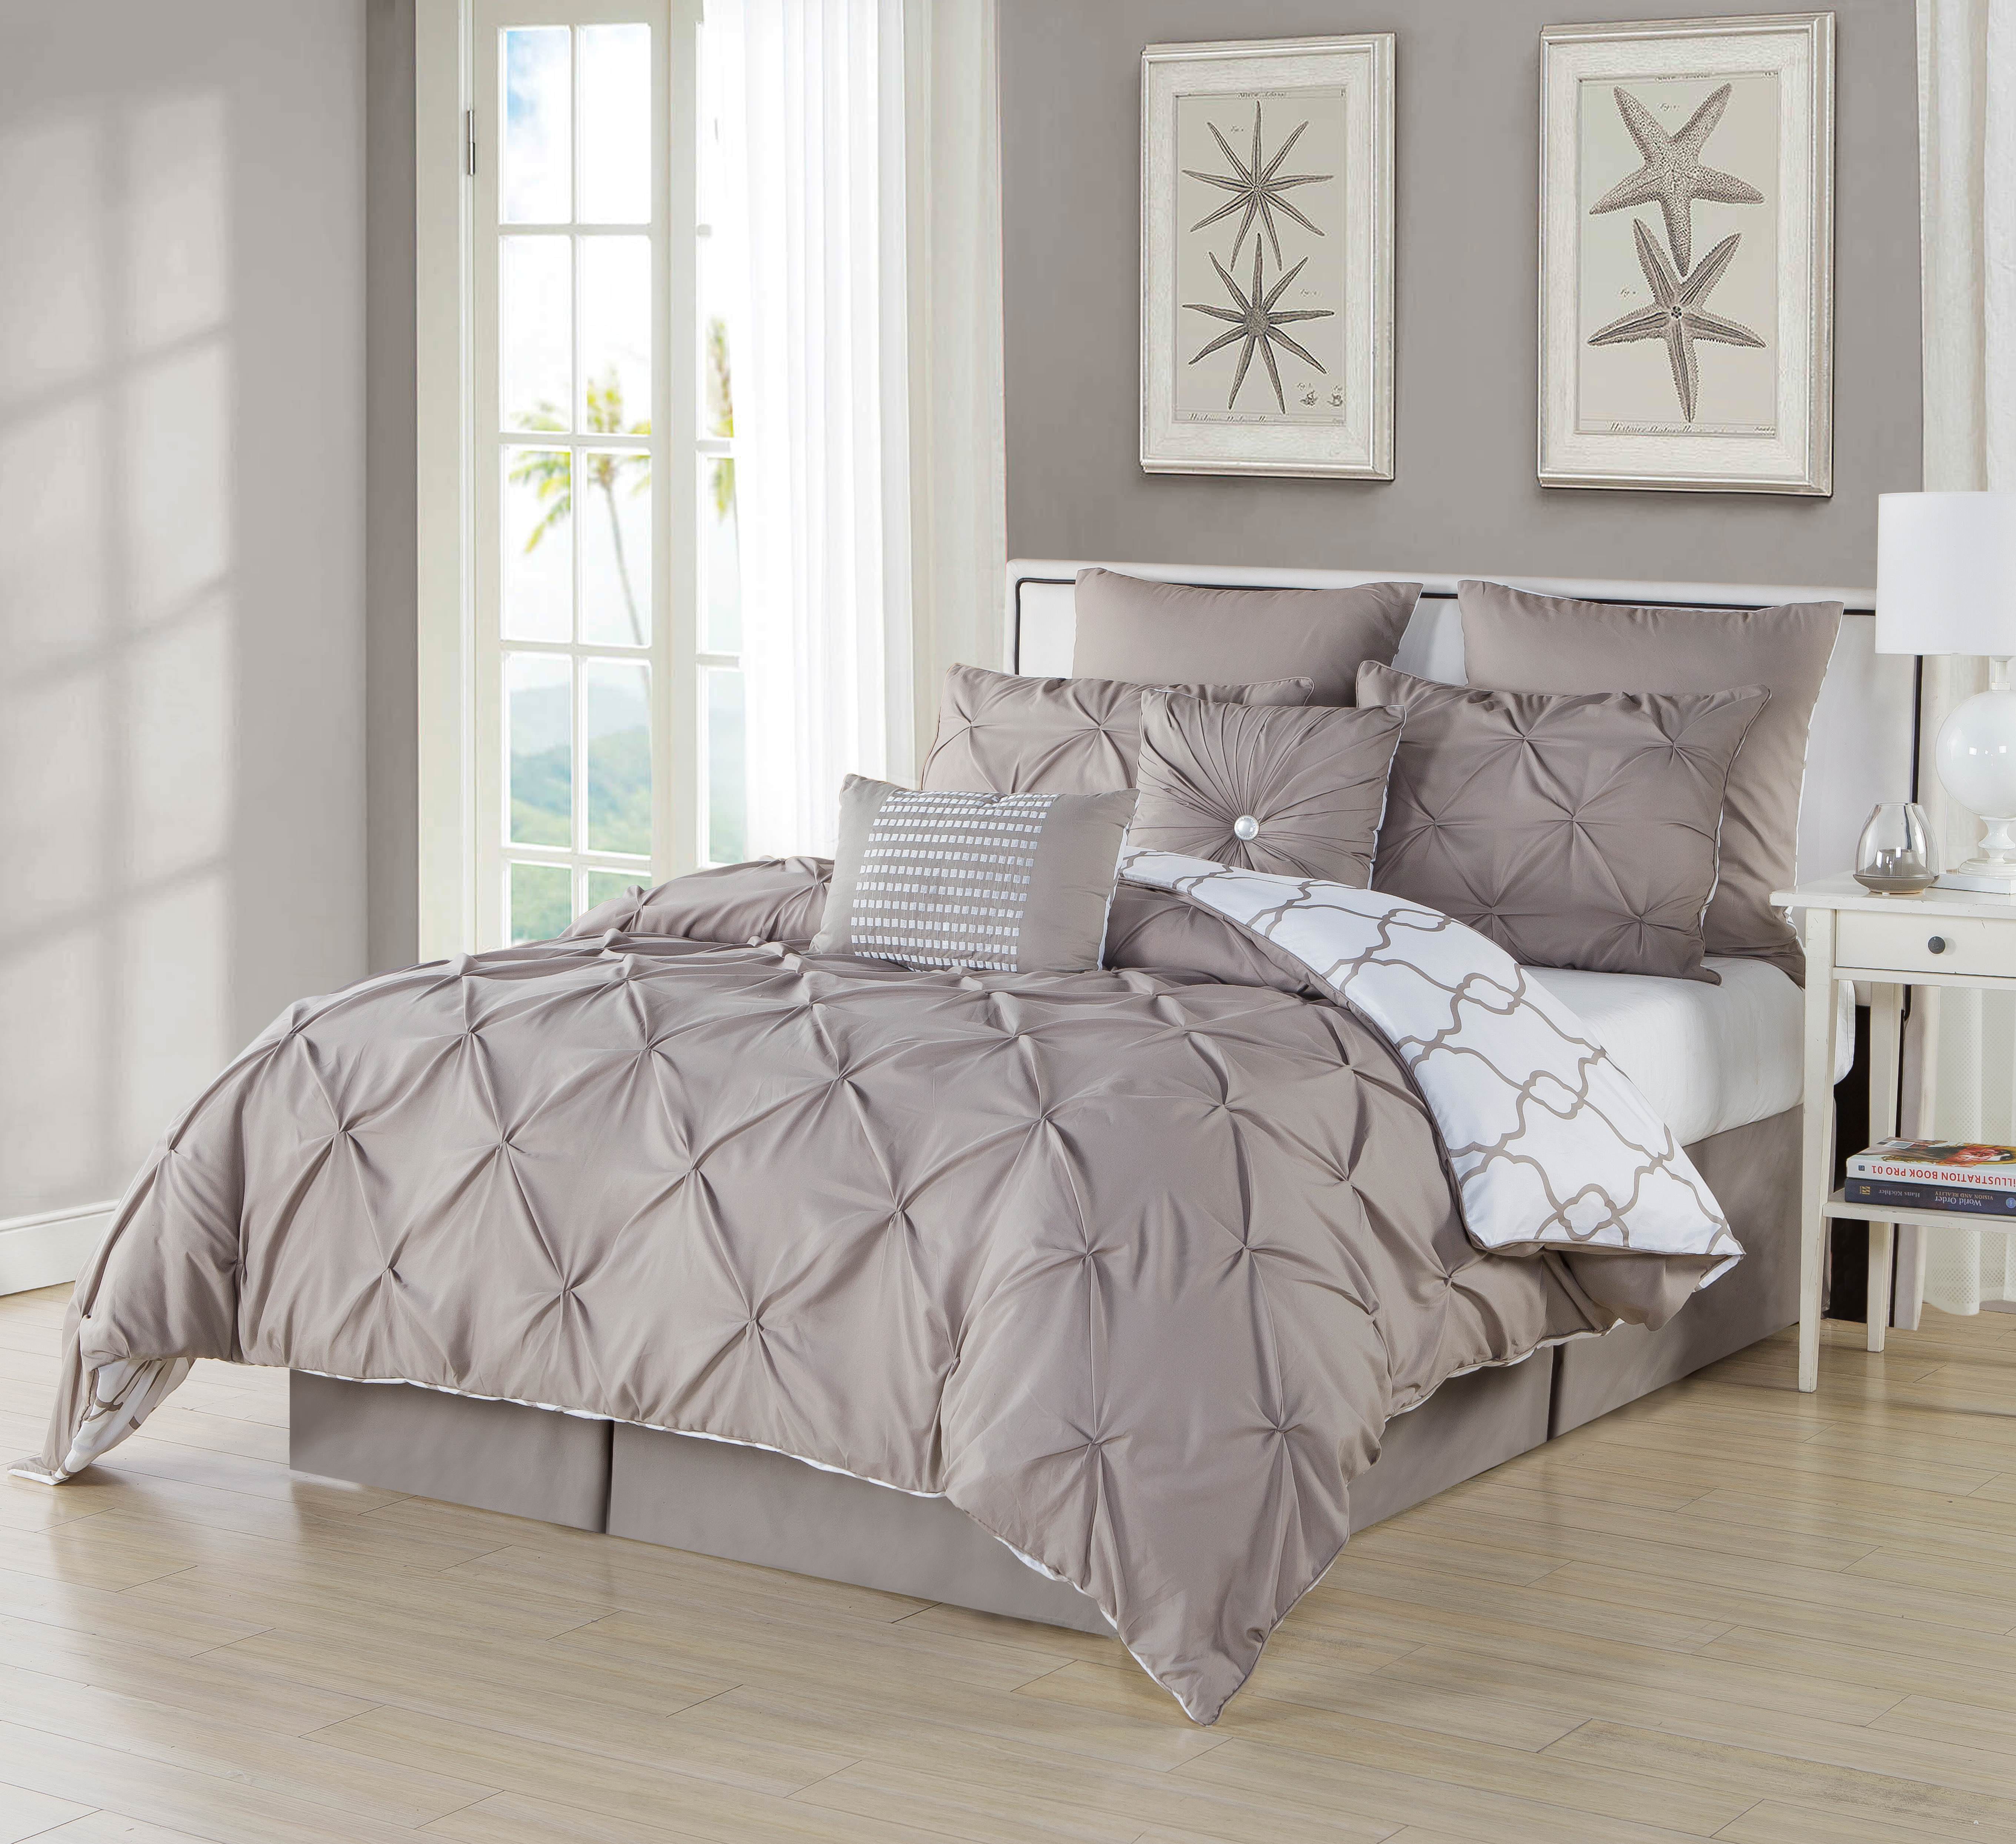 Geometric Pintuck Collection | | Brown Duck River Textile Esy Hotel Quality Luxury Comforter Duvet Insert Cover Hypoallergenic 8 Piece Set Queen Size